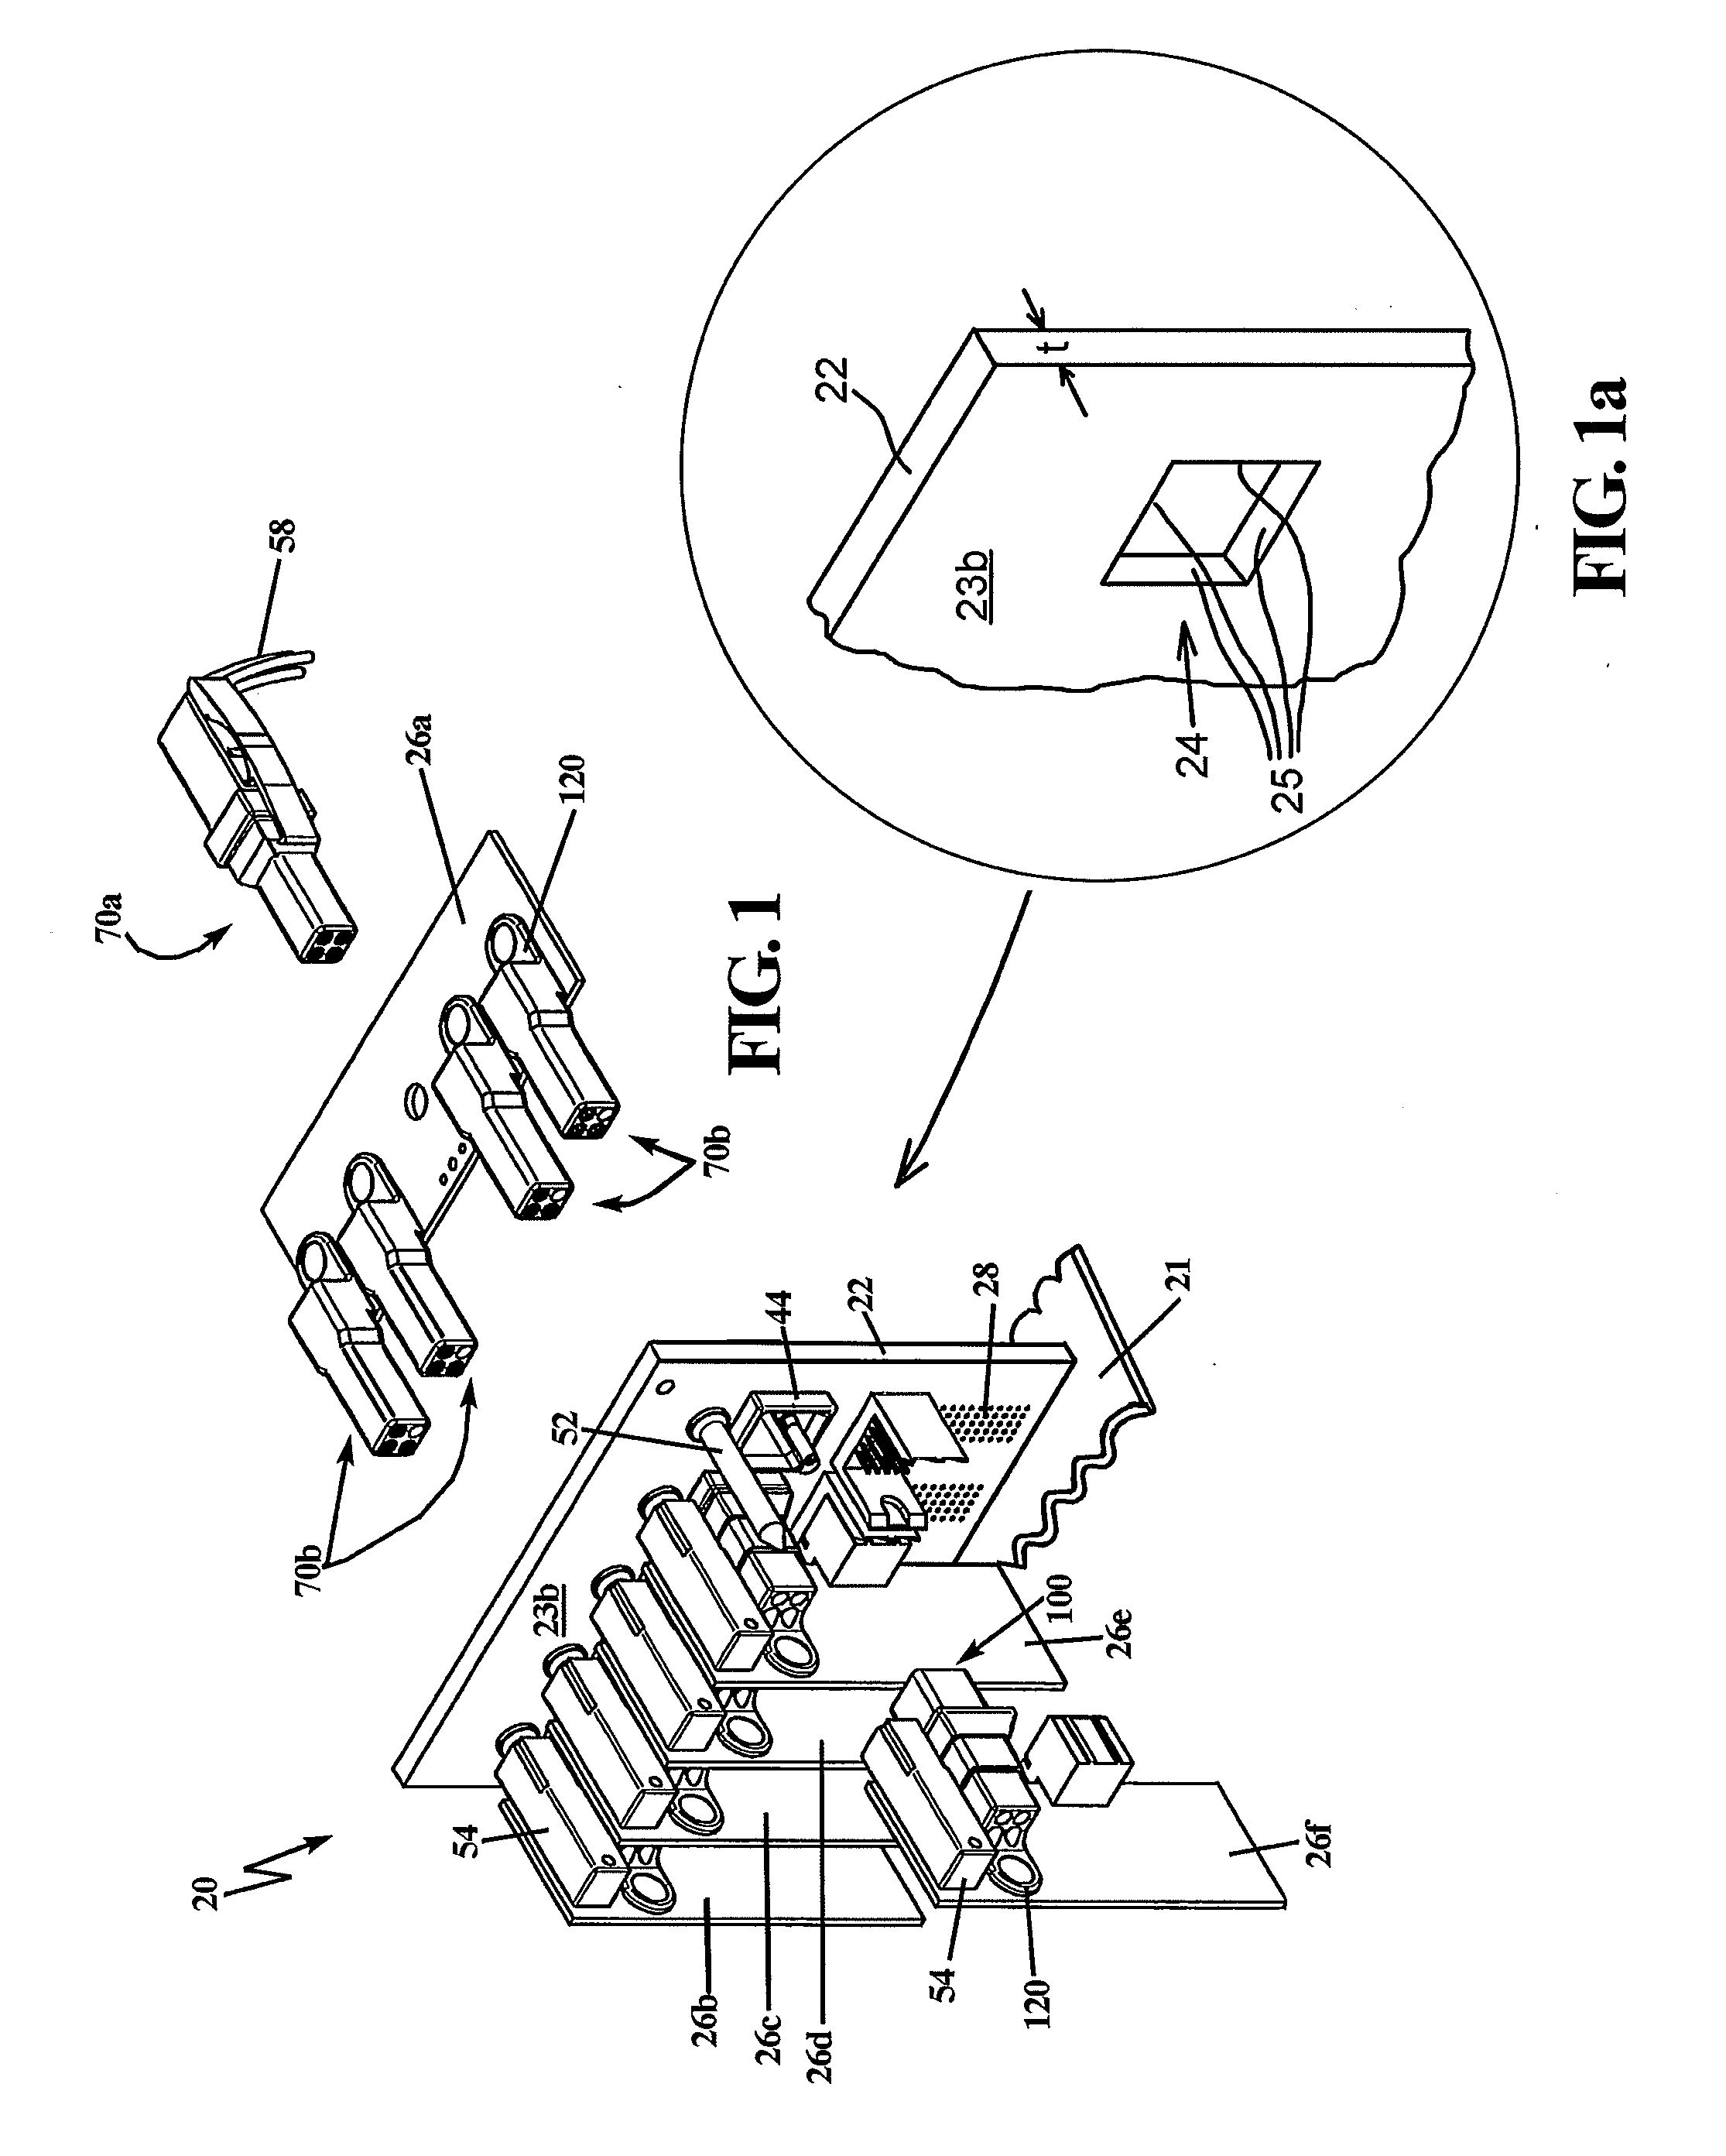 Method and apparatus for making an interconnection between power and signal cables